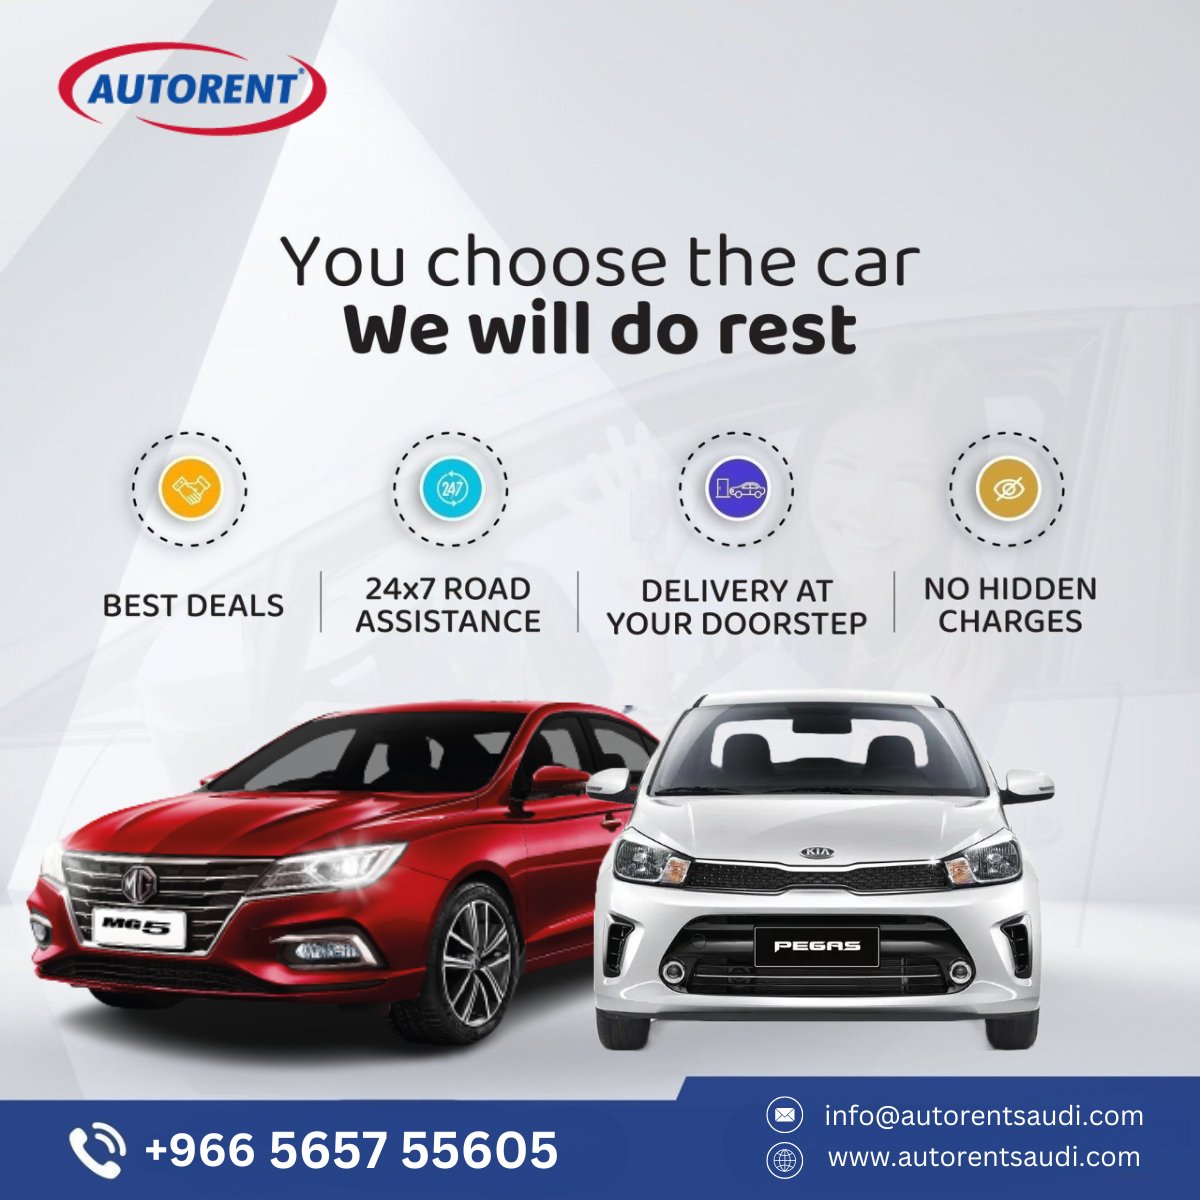 Did you know you could schedule the delivery and pick up of your rental car at #AutorentSaudi? Check out the feature when you book a car.
For booking WhatsApp us at 056 575 5605
Email: info@autorentsaudi.com
Book online - autorentsaudi.com/rent-cars

#SaudiArabia  #carrentalservice